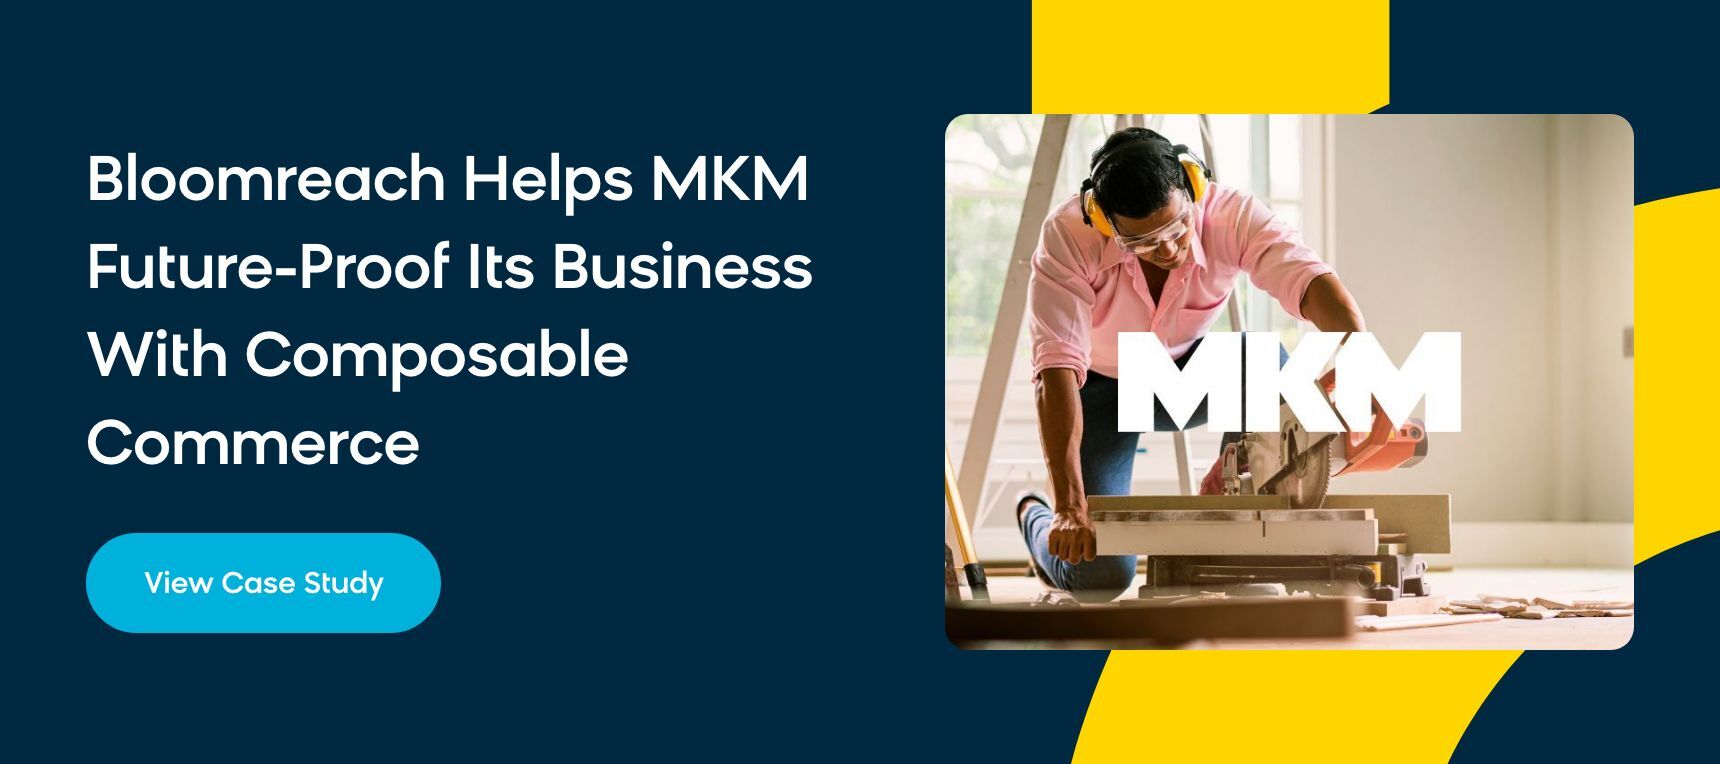 MKM case study with Bloomreach